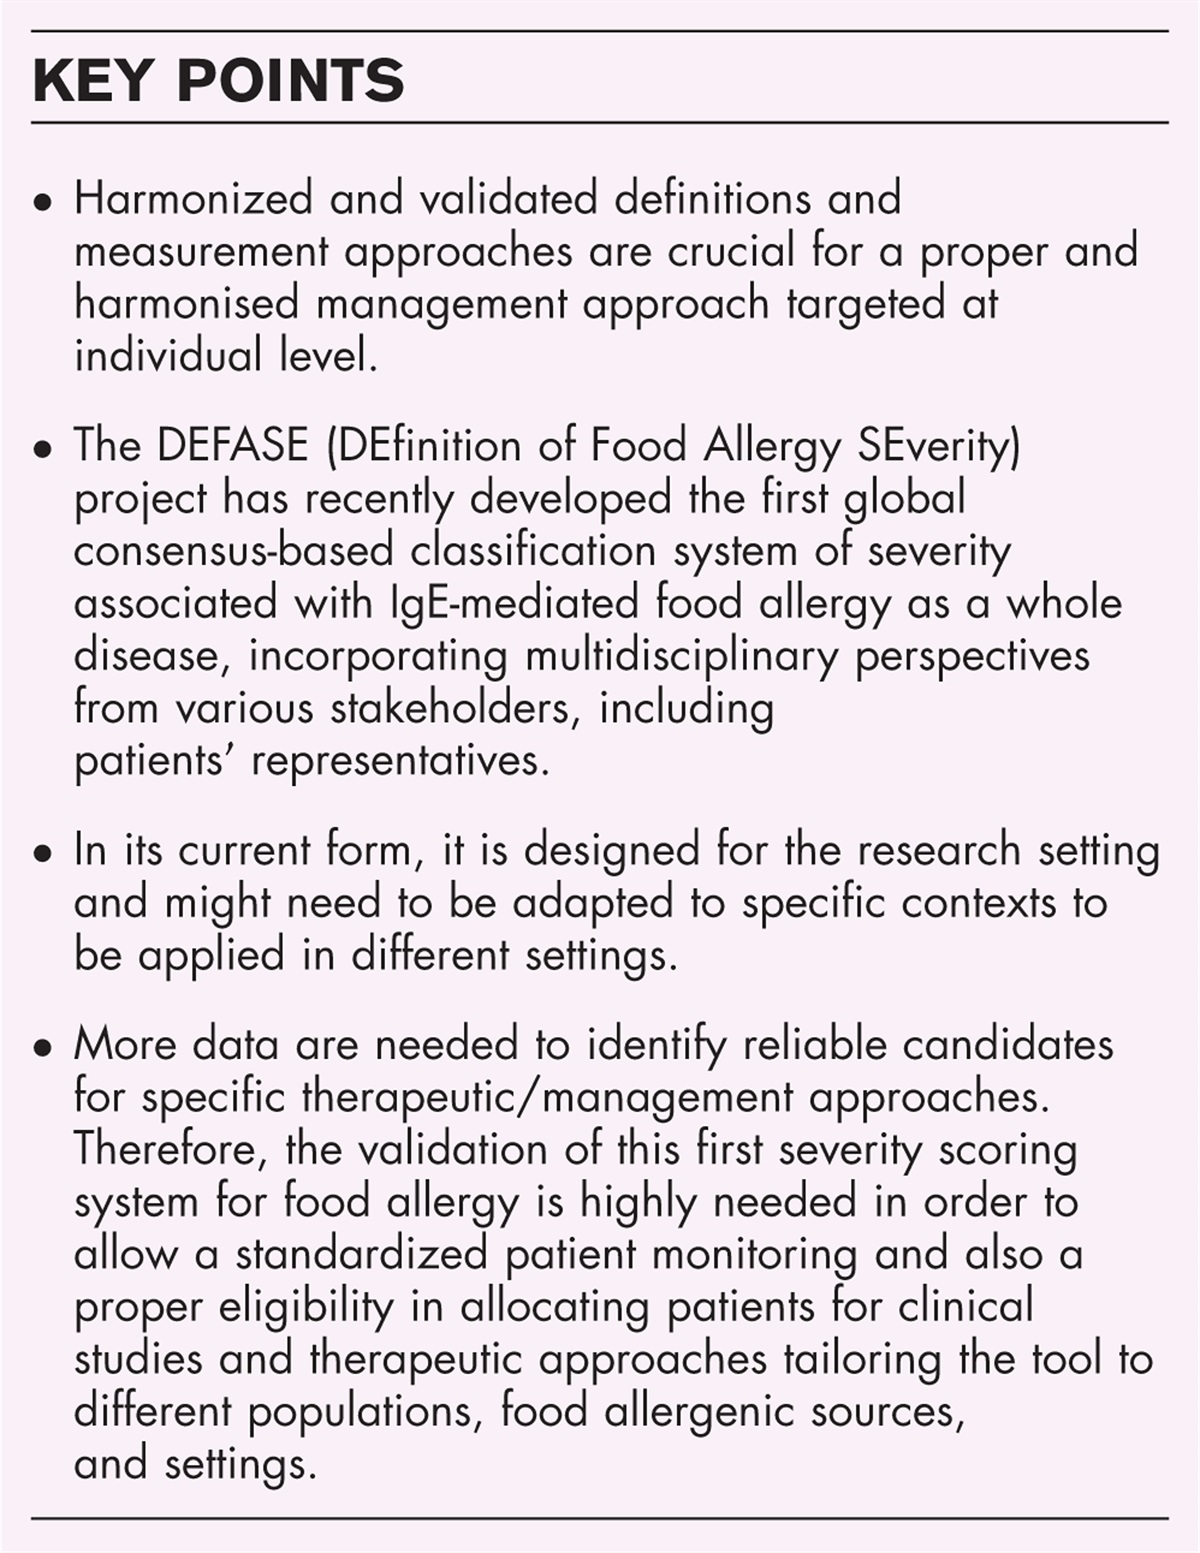 Perspectives in the validation of DEFASE: a paradigm shift in food allergy management